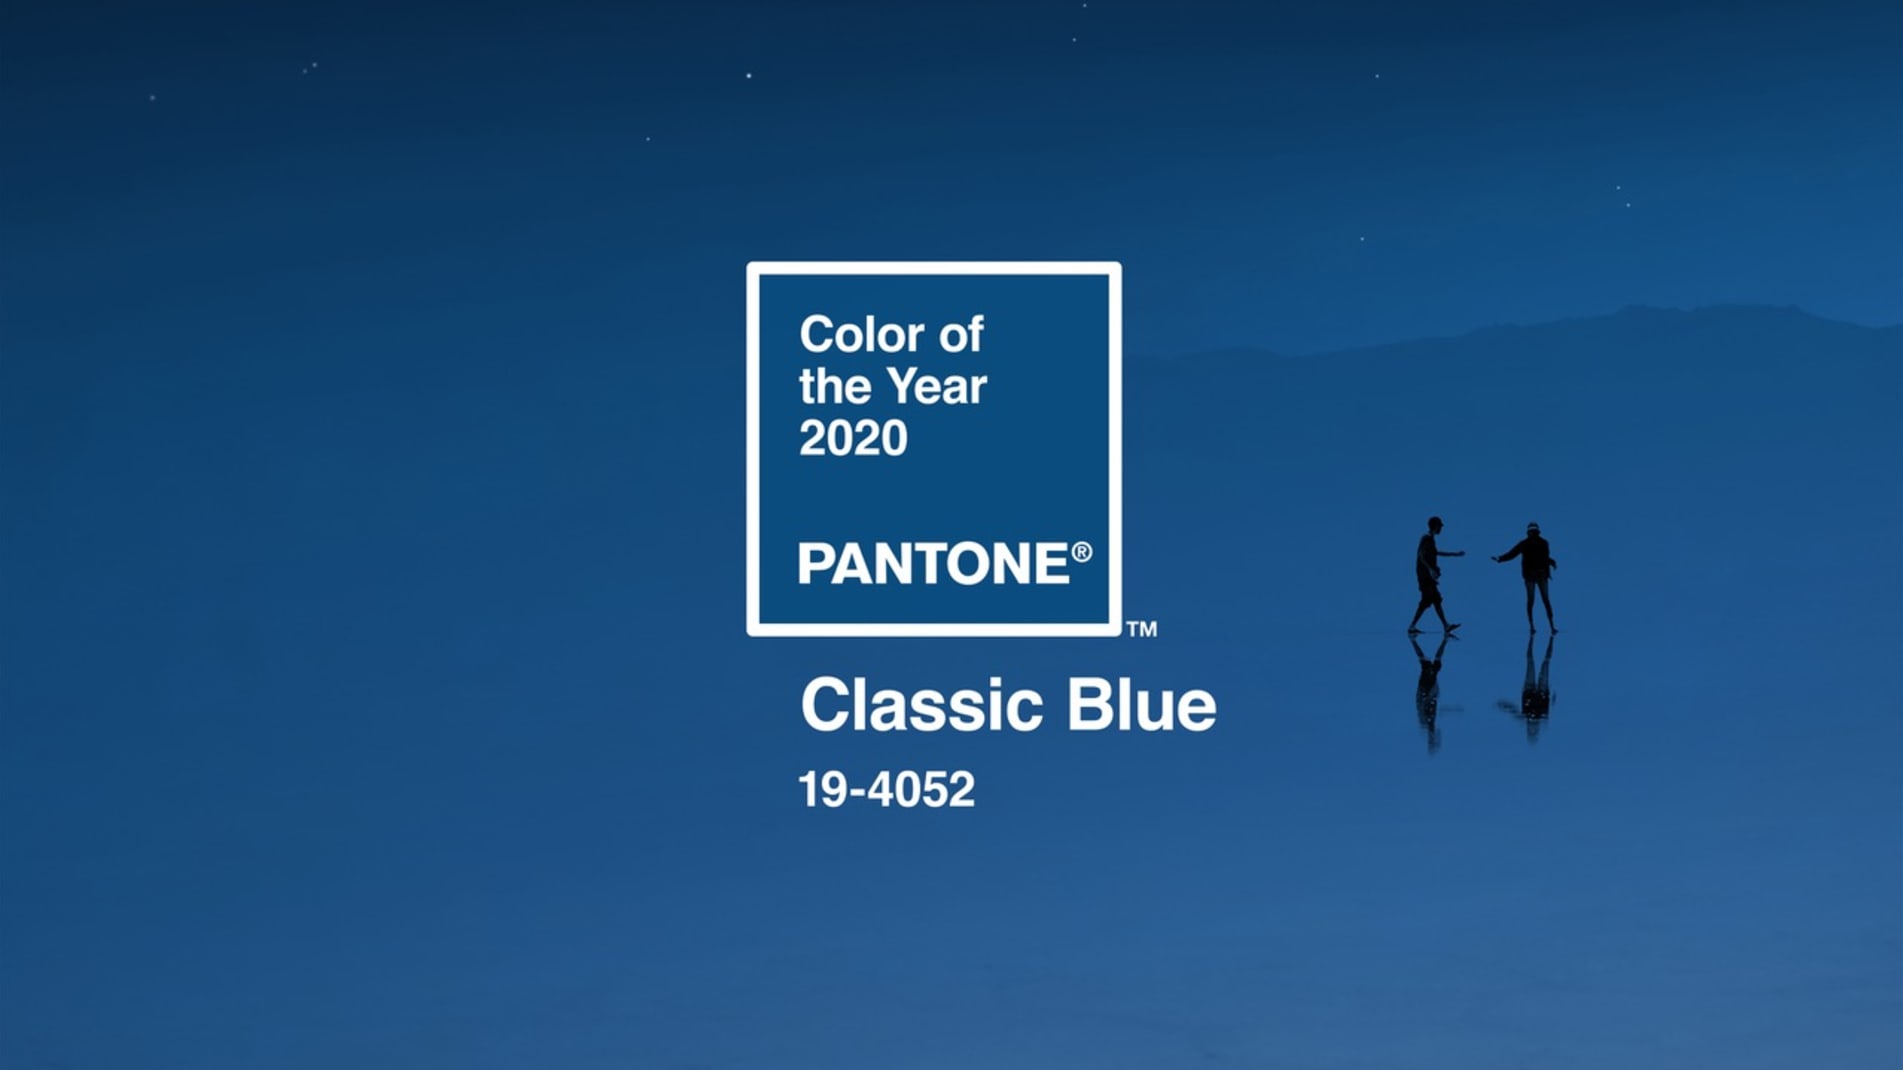 Pantone's 2020 Color of the Year is Classic Blue.